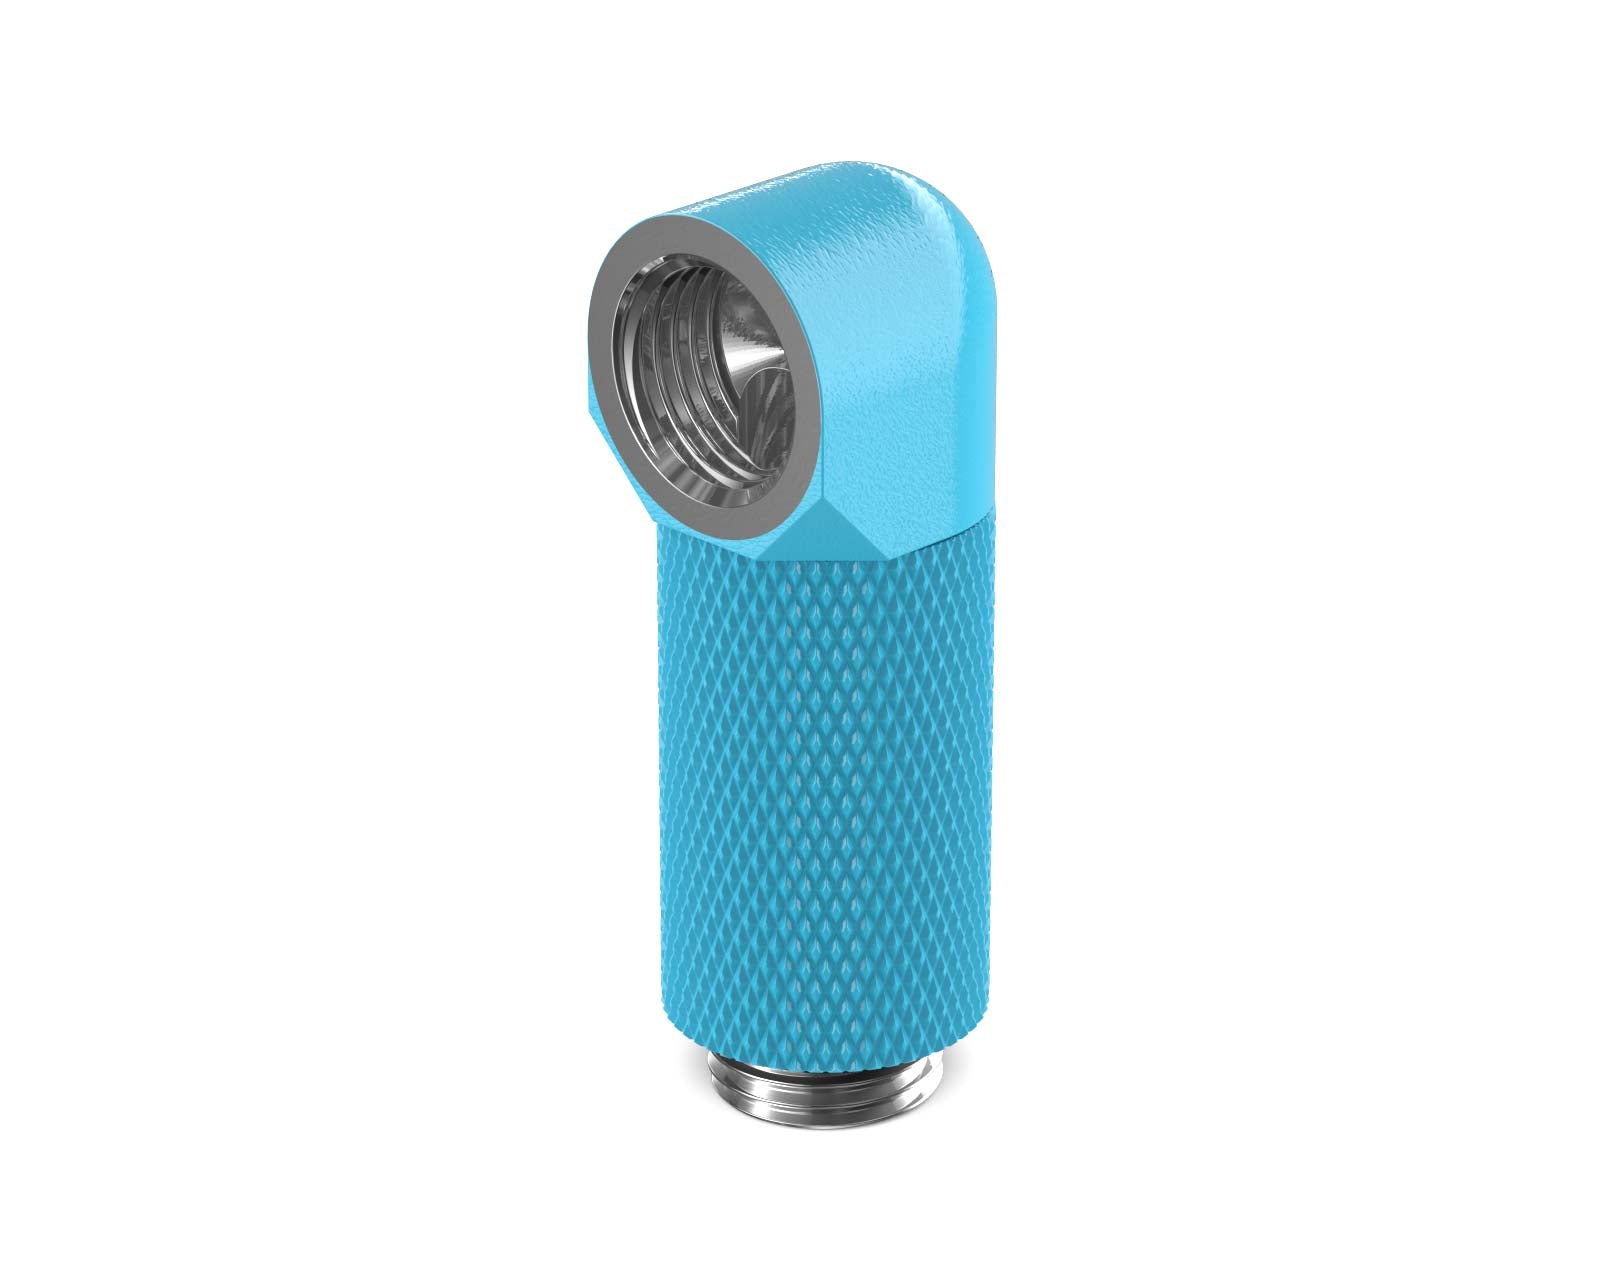 PrimoChill Male to Female G 1/4in. 90 Degree SX Rotary 30mm Extension Elbow Fitting - PrimoChill - KEEPING IT COOL Sky Blue